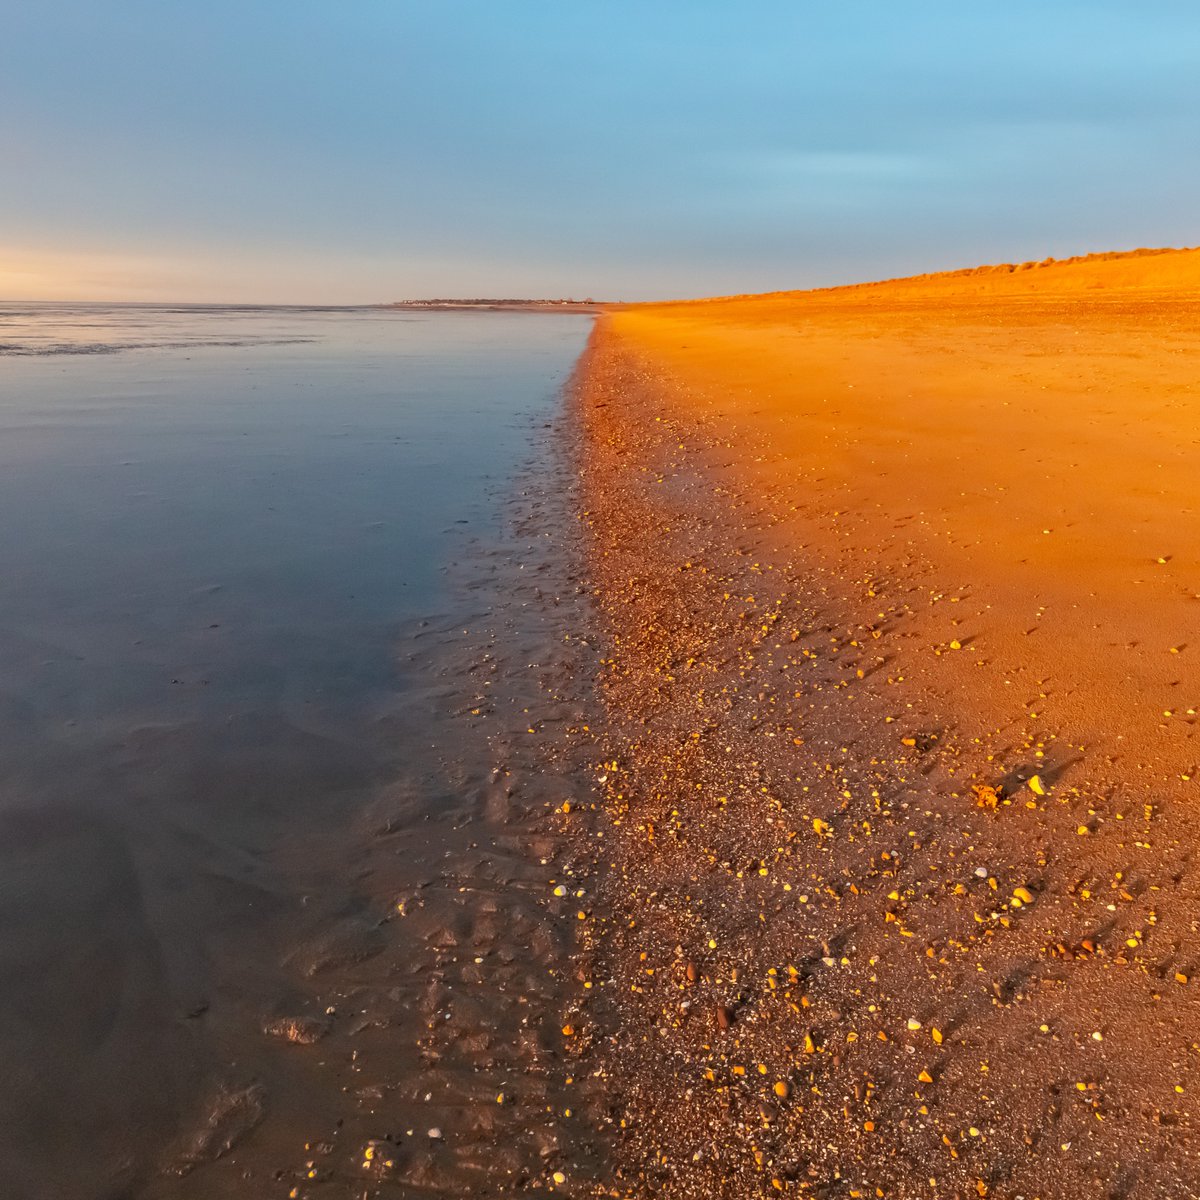 The show began when the sand was bathed in a golden orange light